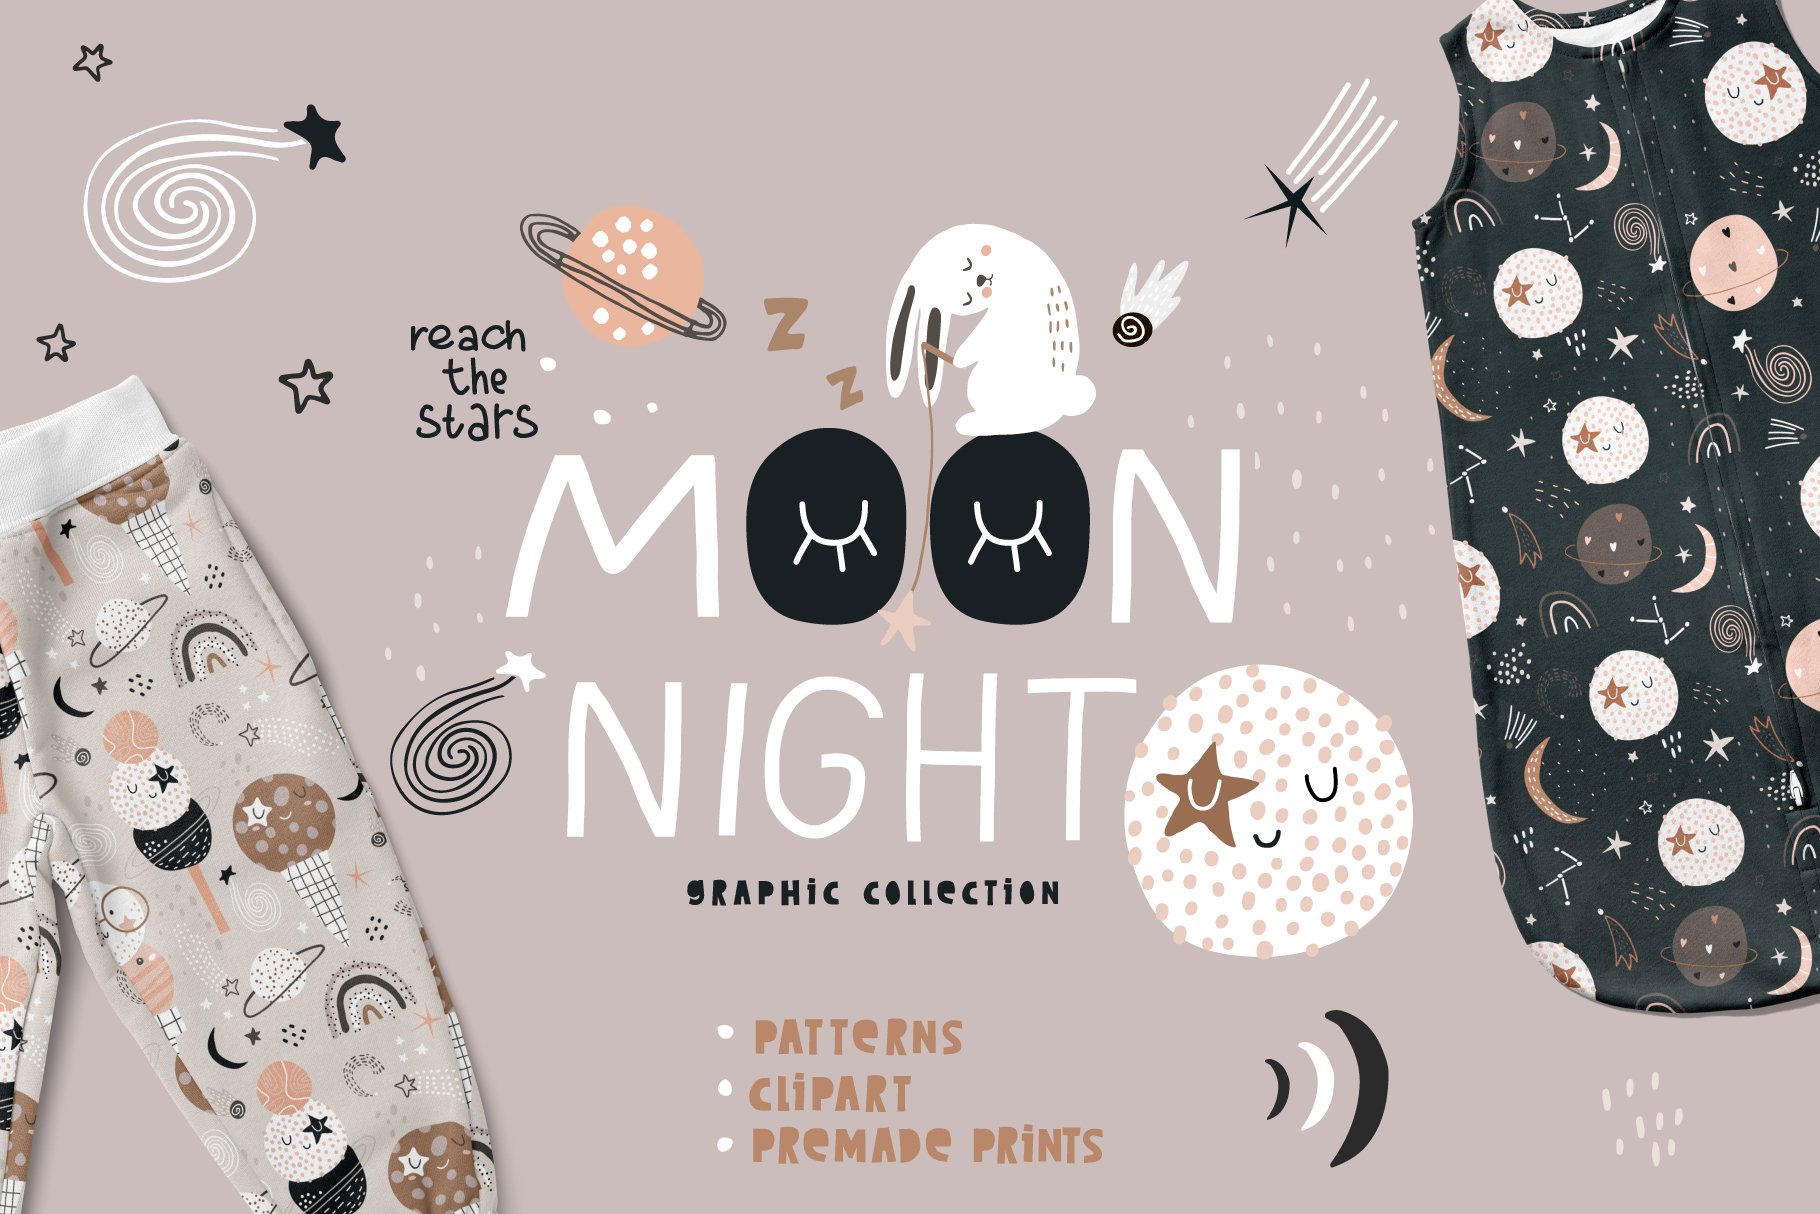 MOON night graphic collection cover image.